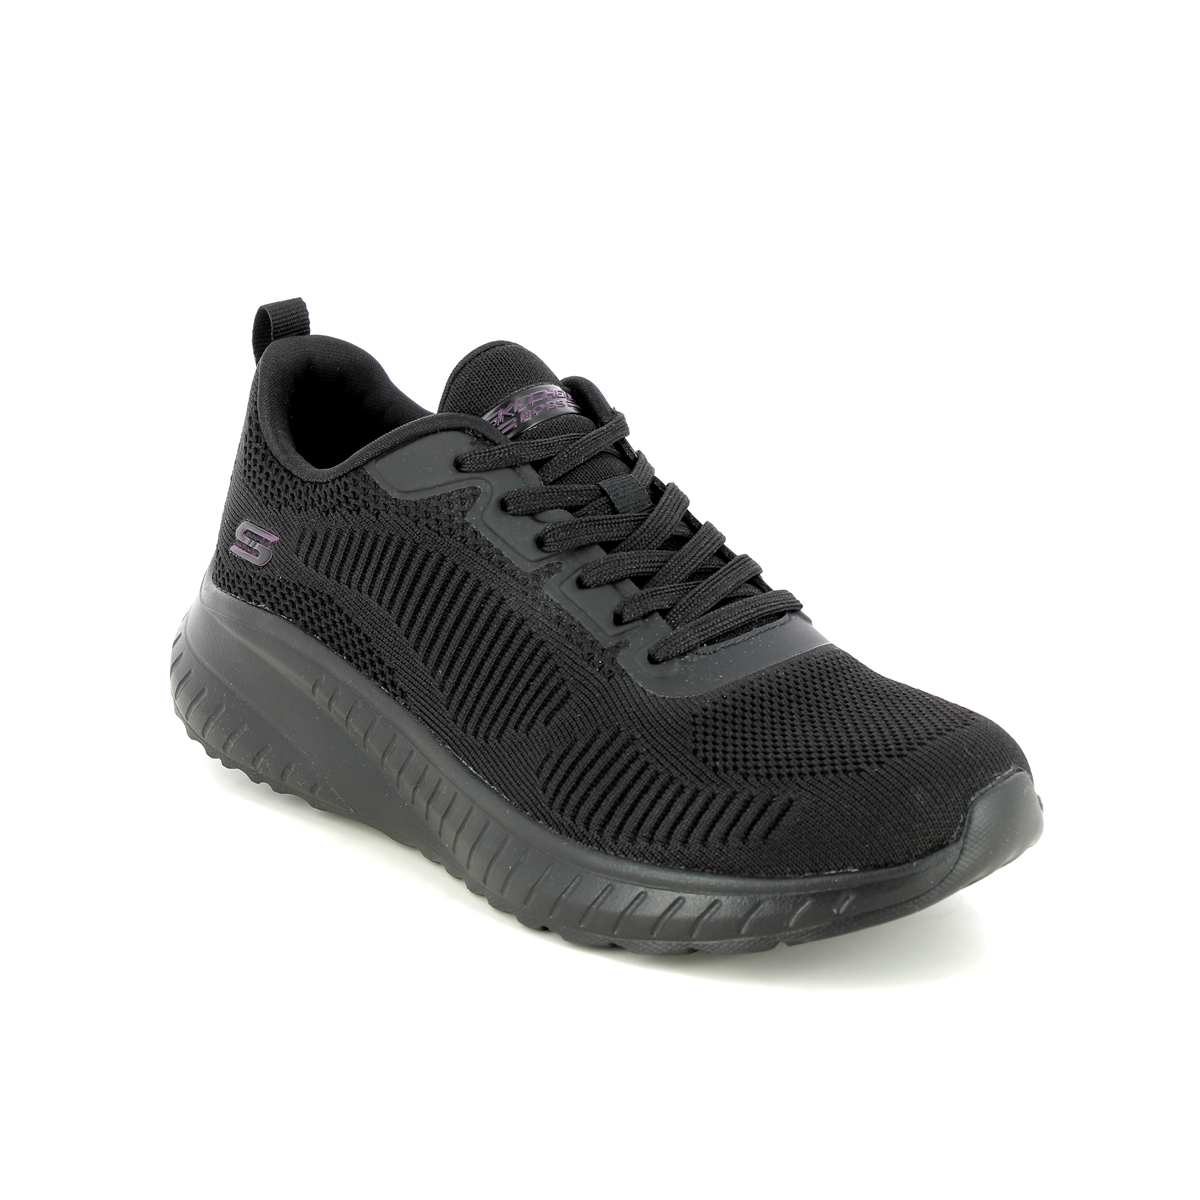 Skechers Bobs Squad Chaos BBK Black Womens trainers 117209 in a Plain Textile in Size 8